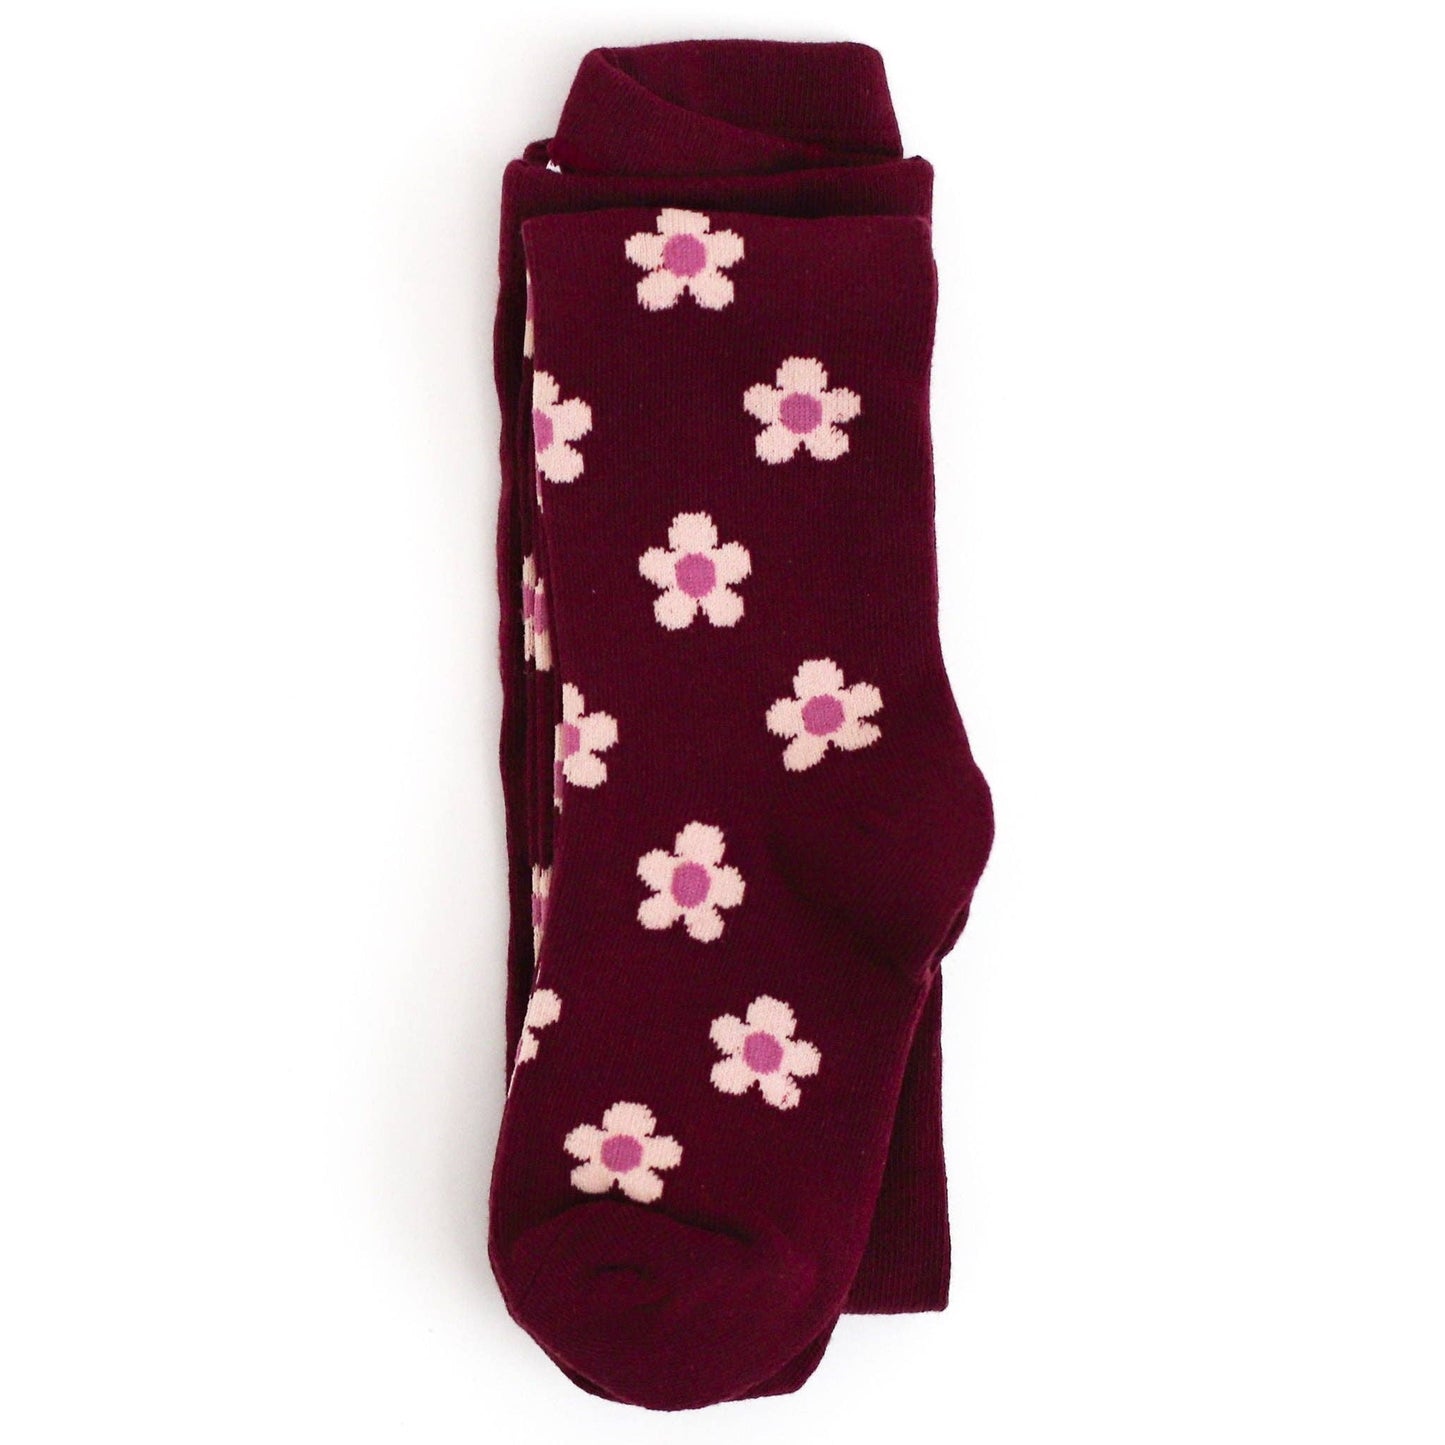 Burgundy Flower Knit Tights: 3-4 YEARS